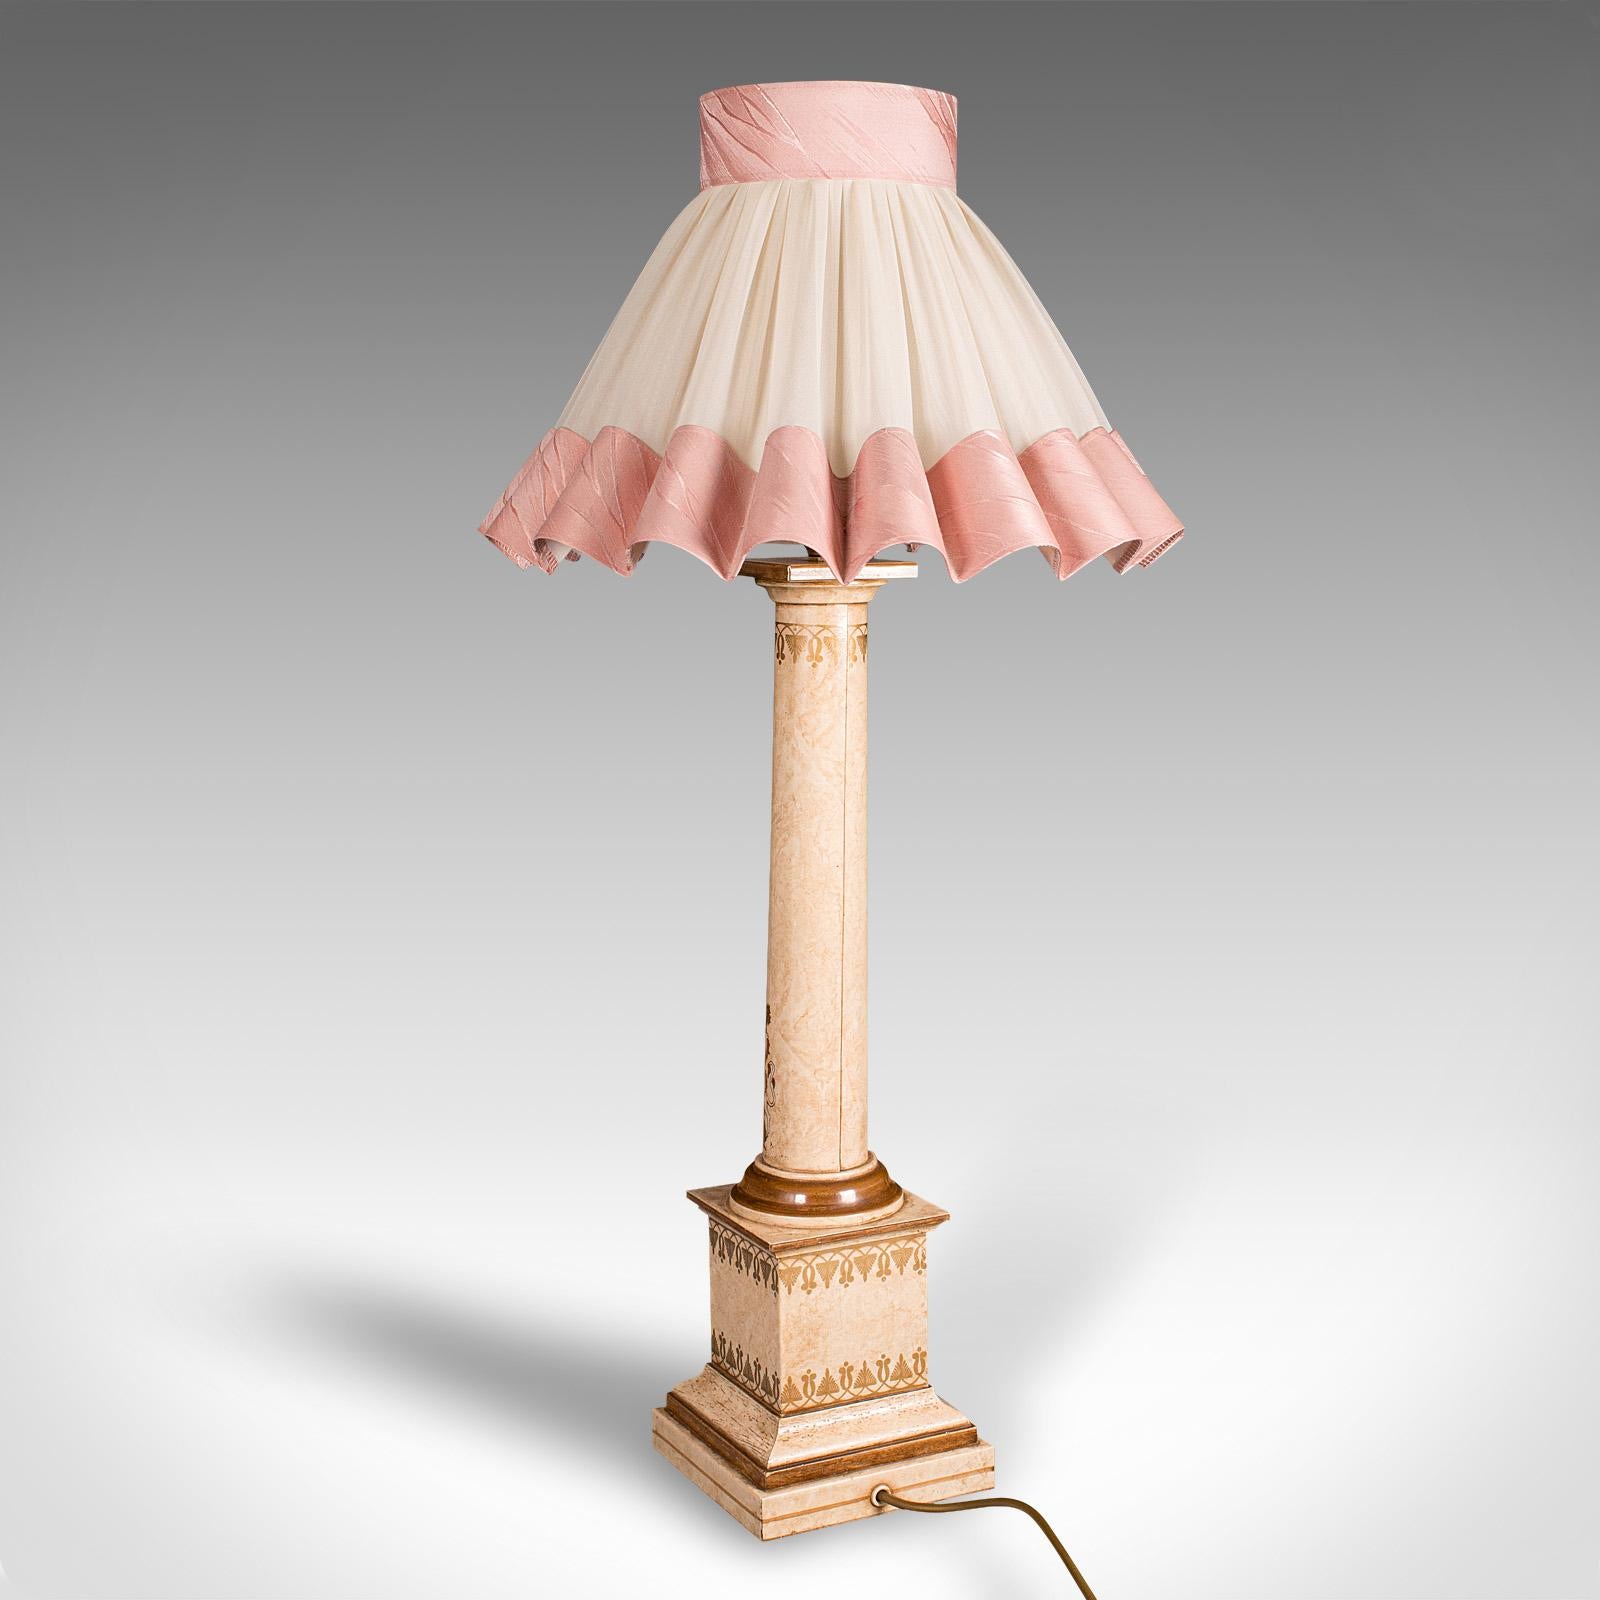 Metal Tall Pair Of Vintage Table Lamps, English, Decorative Light, Mid Century, C.1960 For Sale